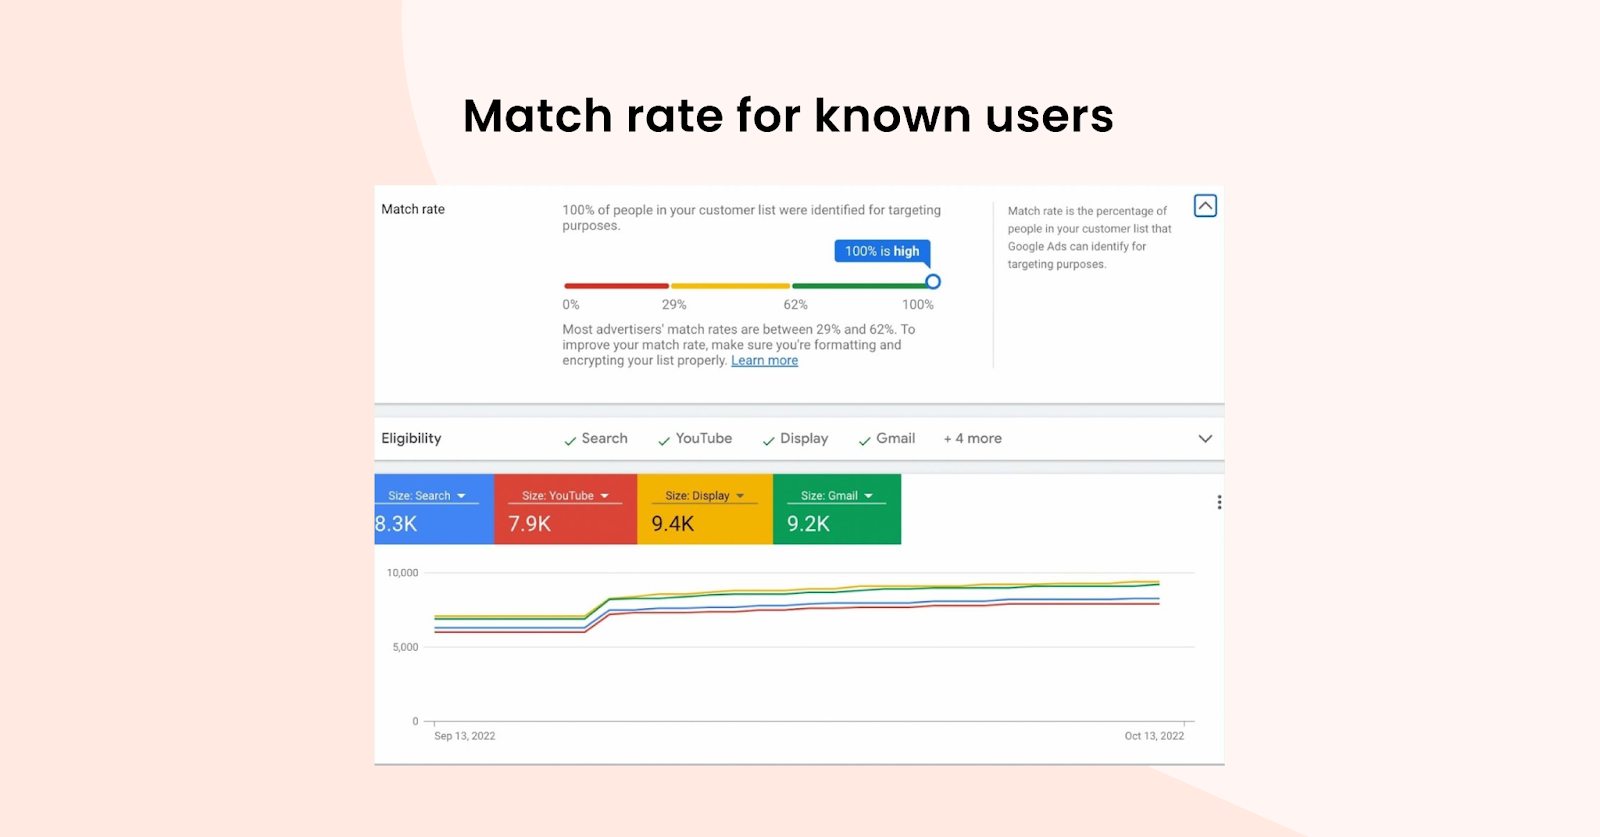 First-party data improves the Google customer match